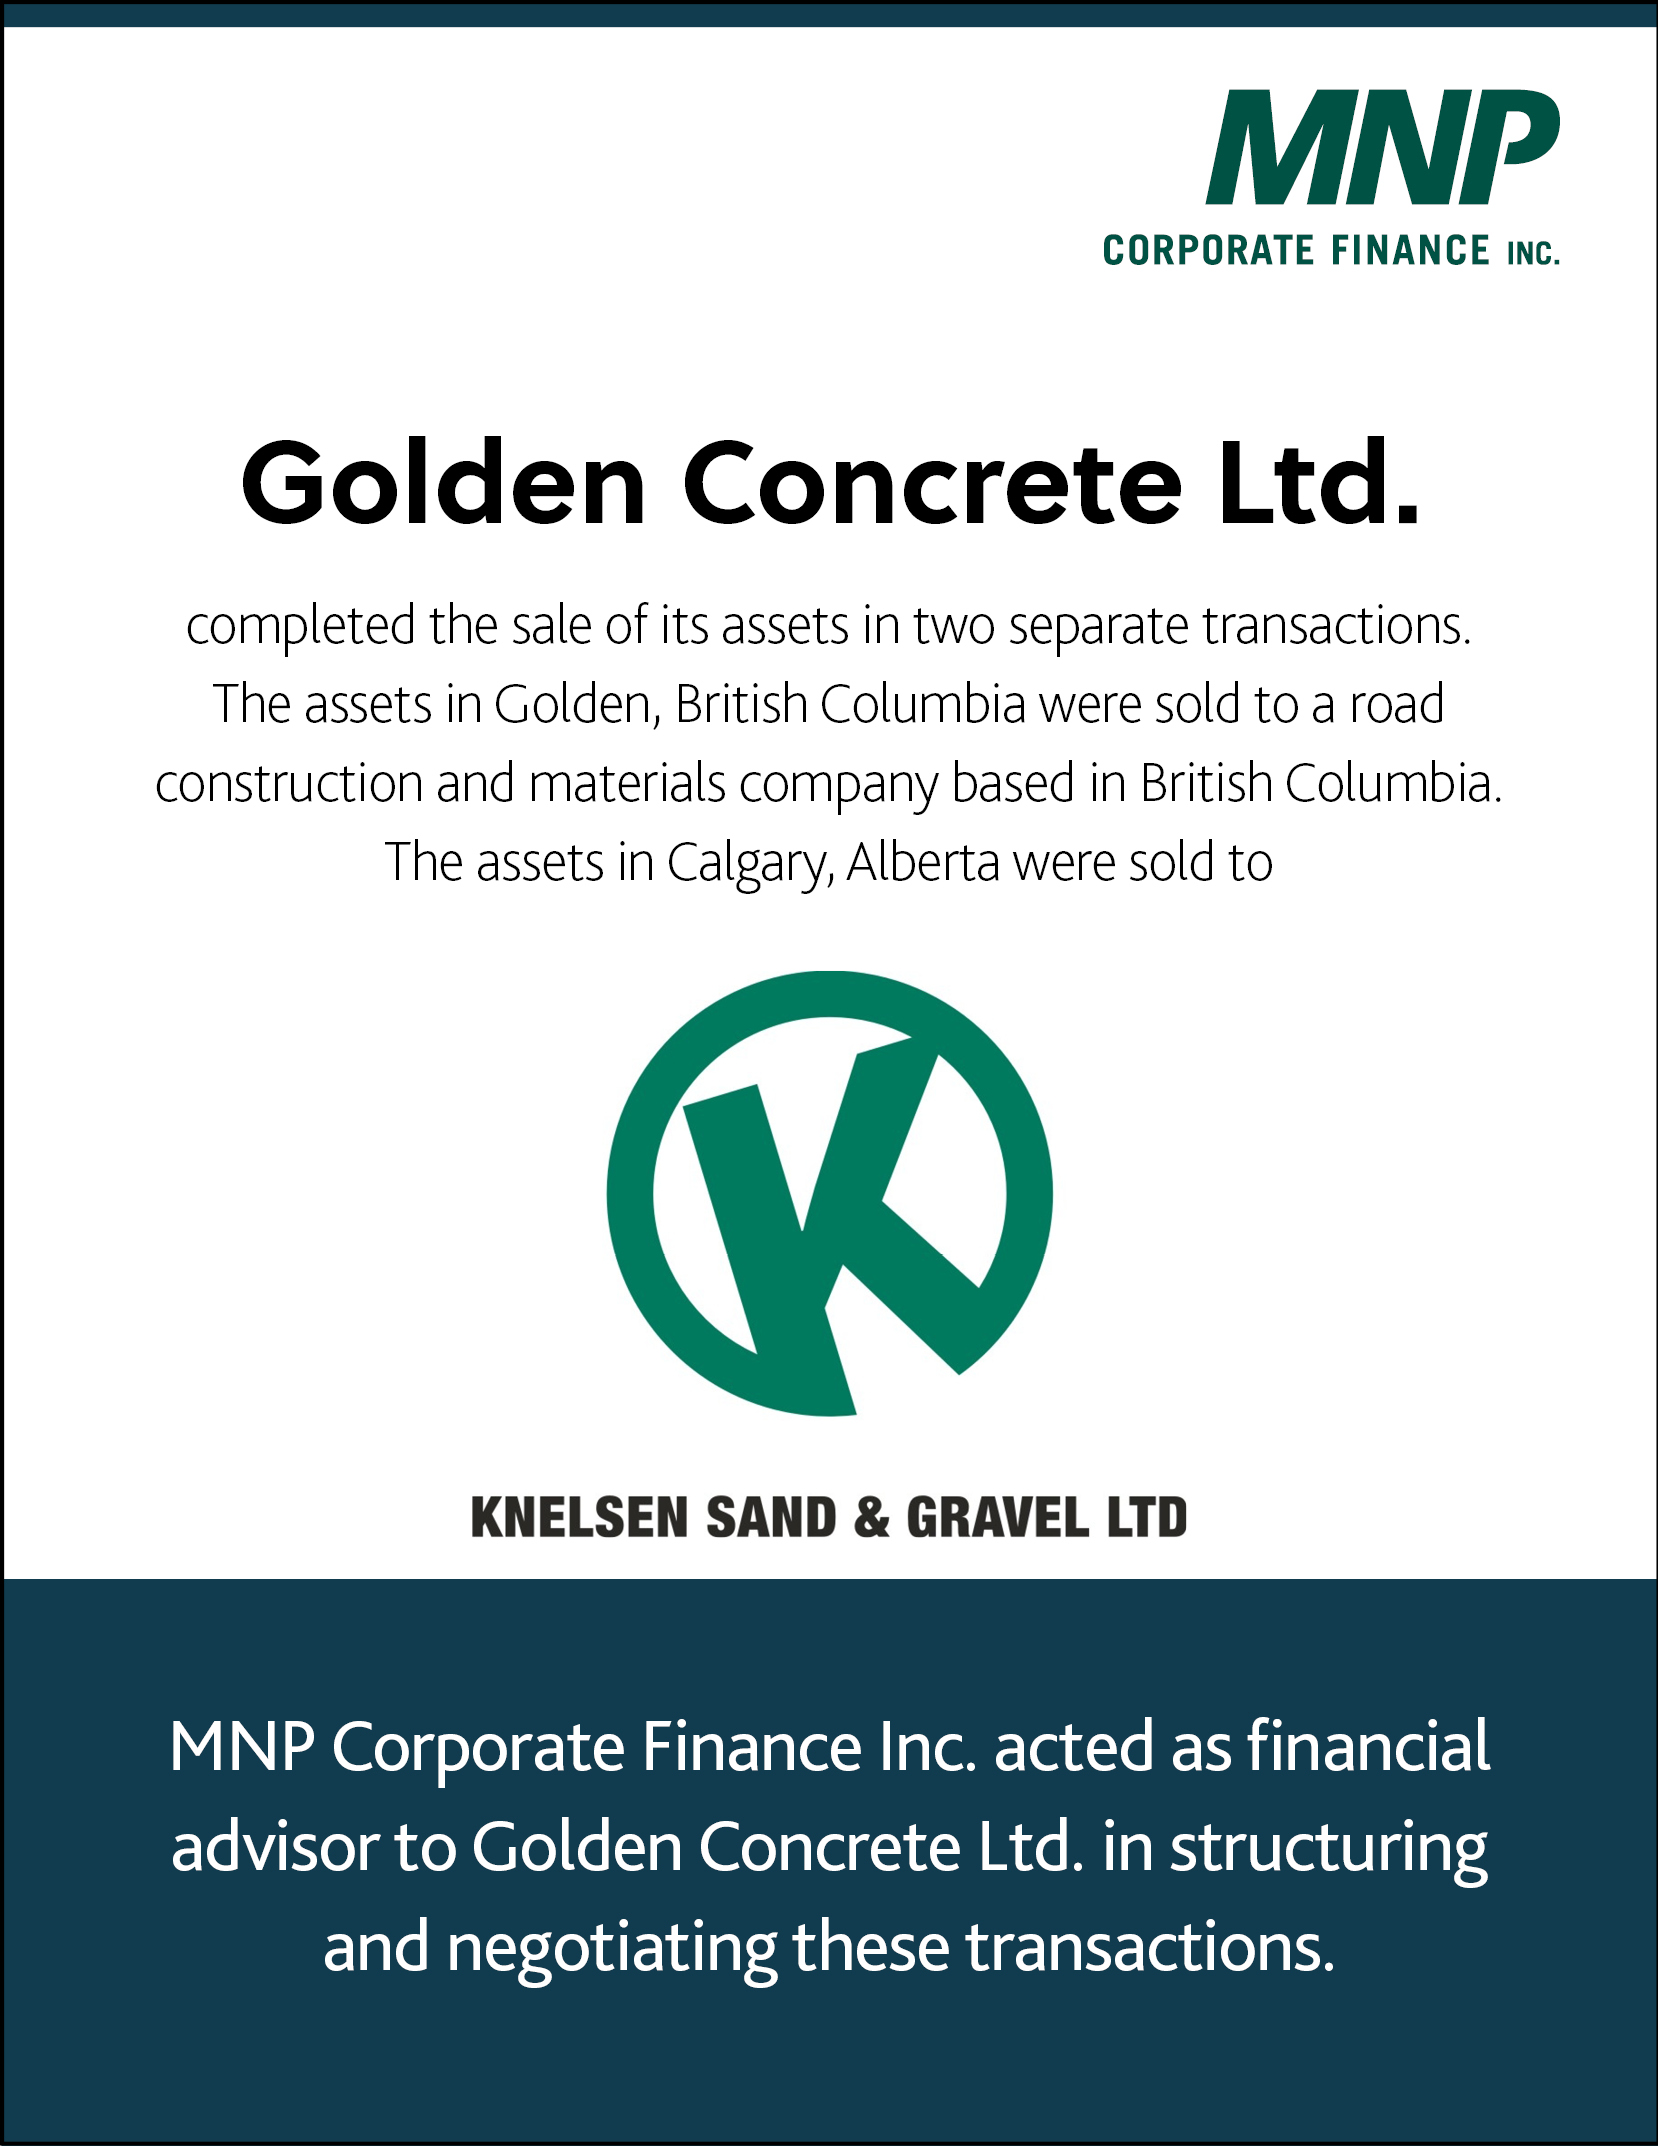 Golden Concrete Ltd completed the sale of its assets in two separate transactions. The assets in Golden, British Columbia were sold to a road construction and materials company based in British Columbia. The assets in Calgary, Alberta were sold to Knelsen Sand & Gravel Ltd